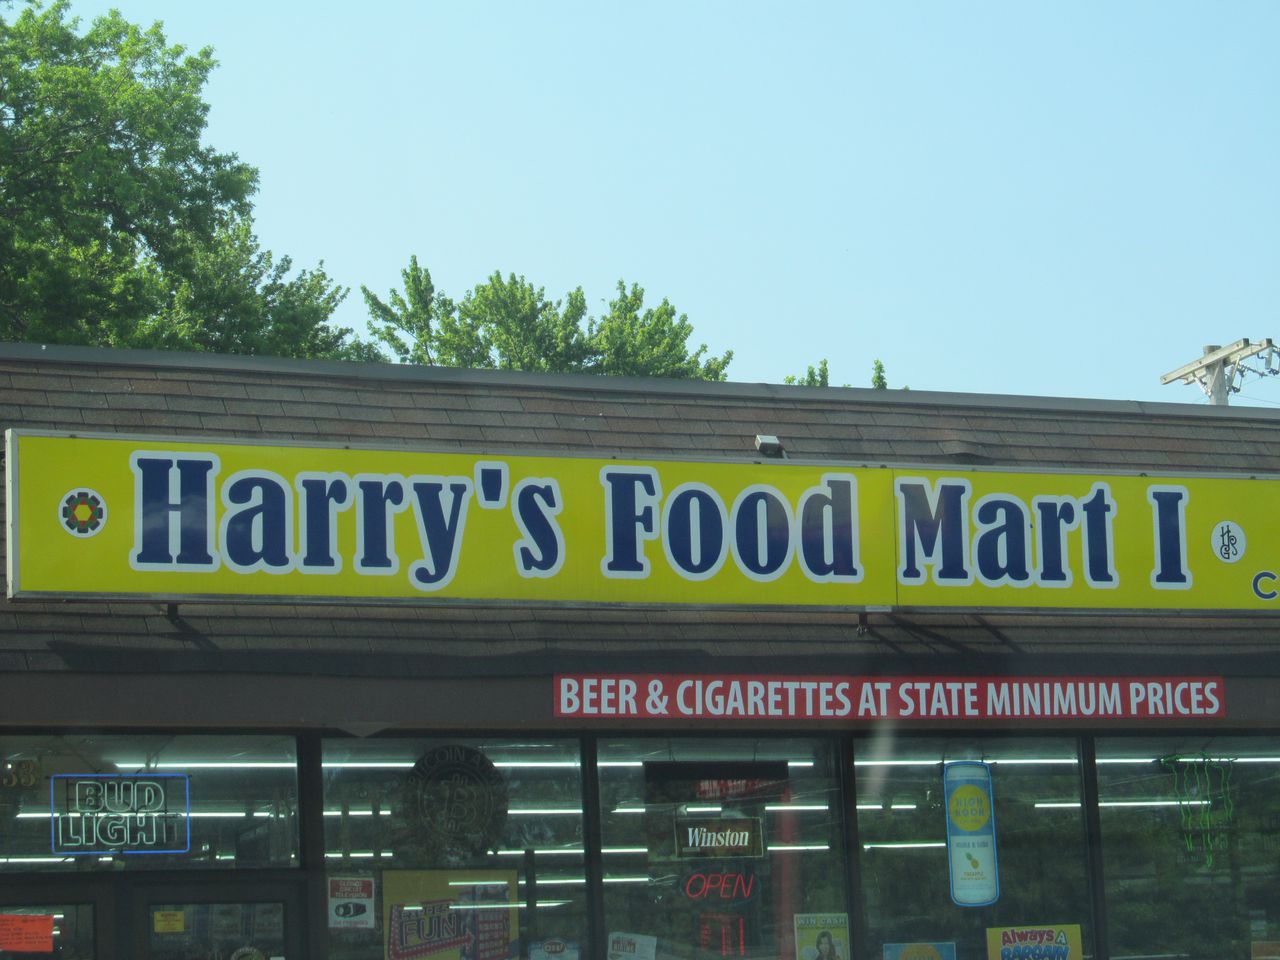 Harry's Food Mart I has one of the highest health inspector violation counts in Lake County.